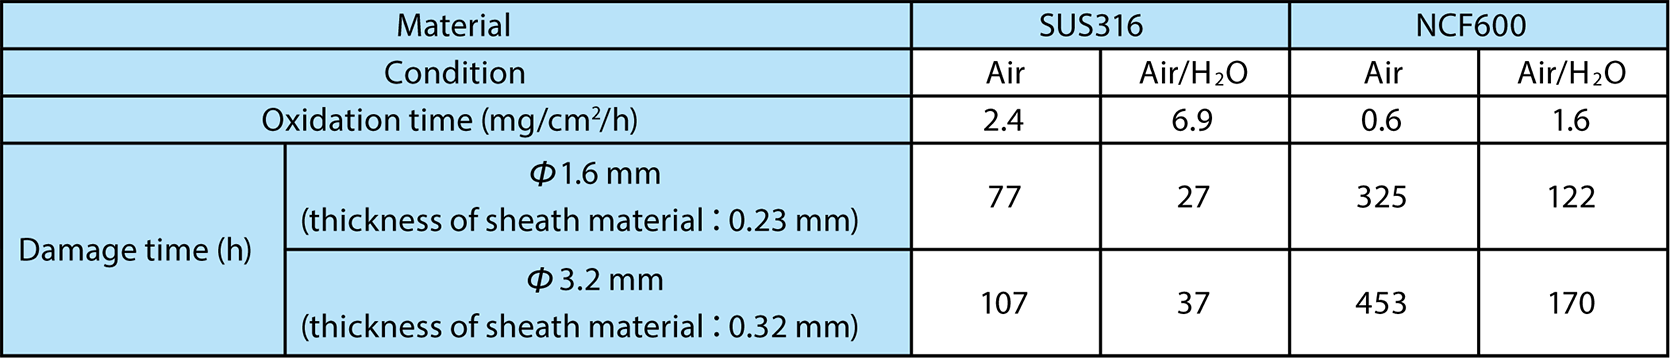 Table 4-1  Evaluation of the damage time for sheath materials used in MI cables under air or air/H2O mixtures at 1015 C